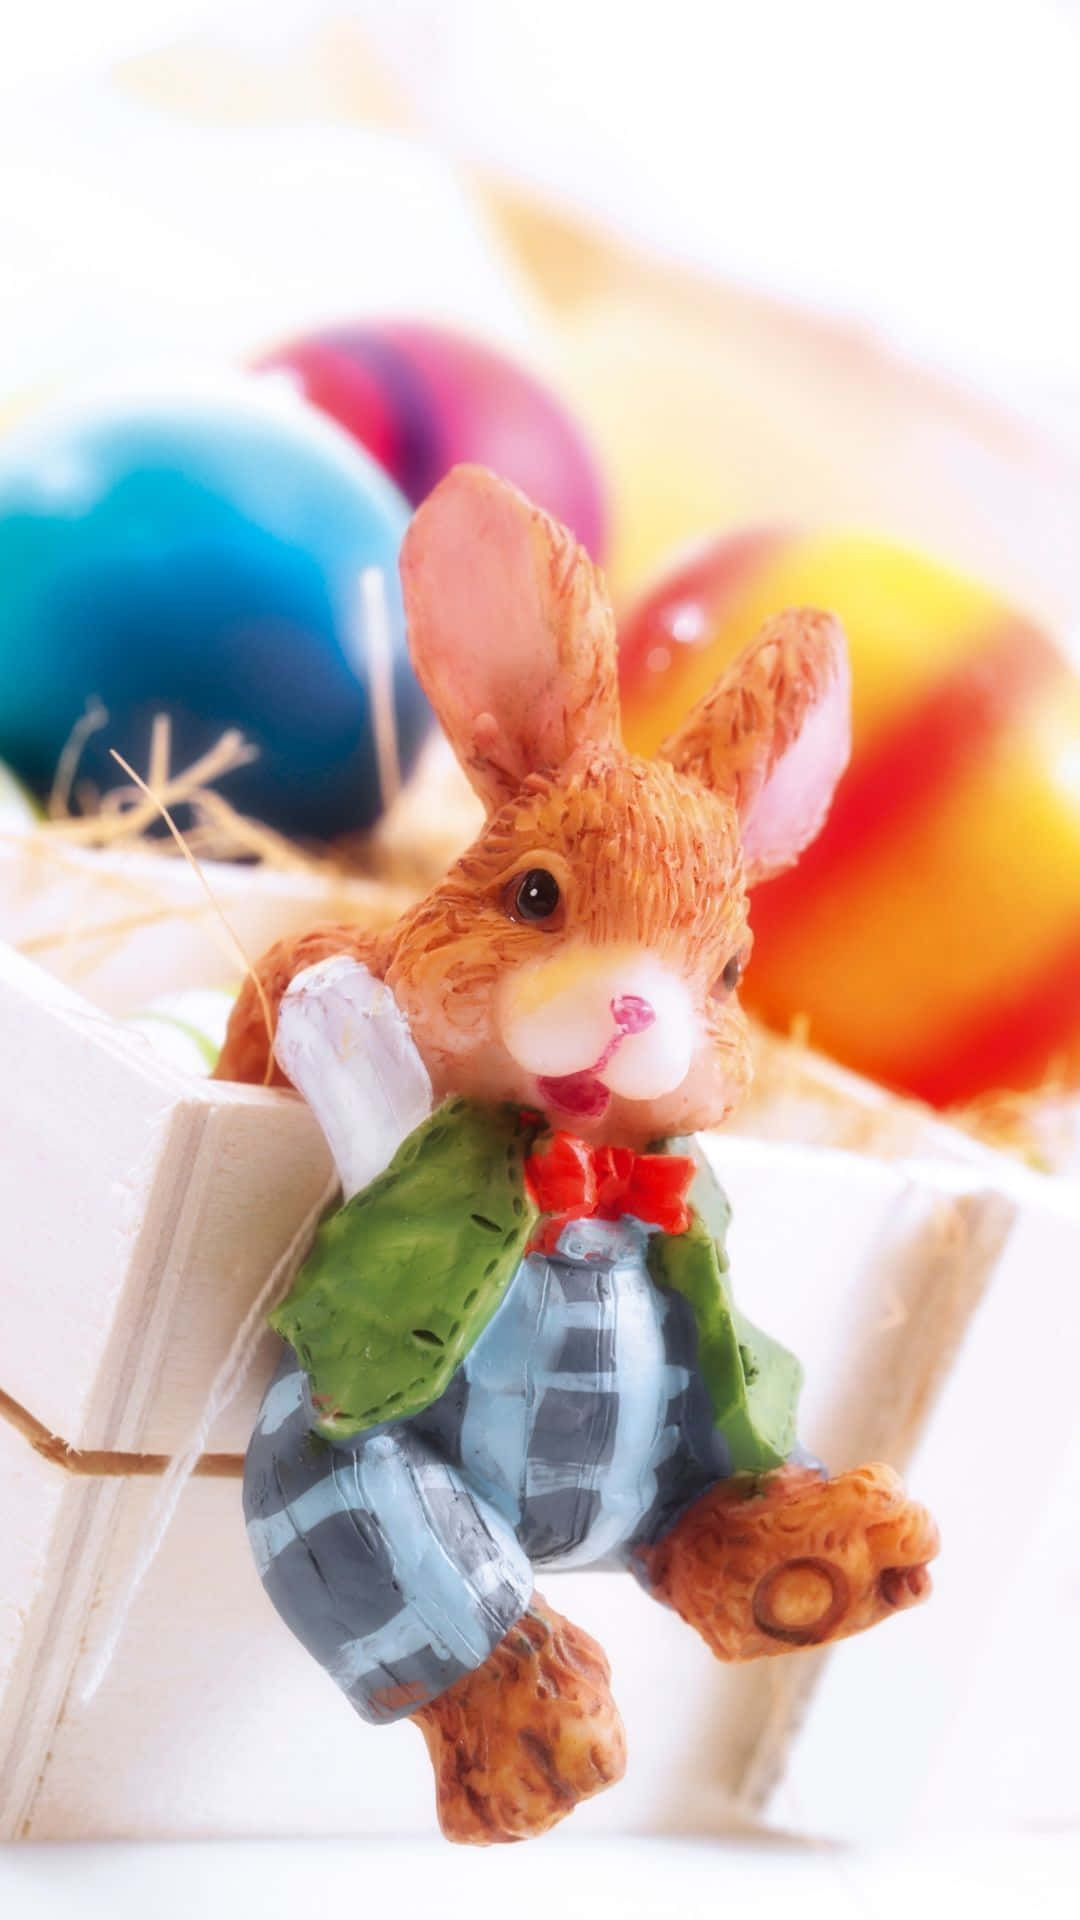 Caption: Delightful Easter Bunny With Colorful Eggs